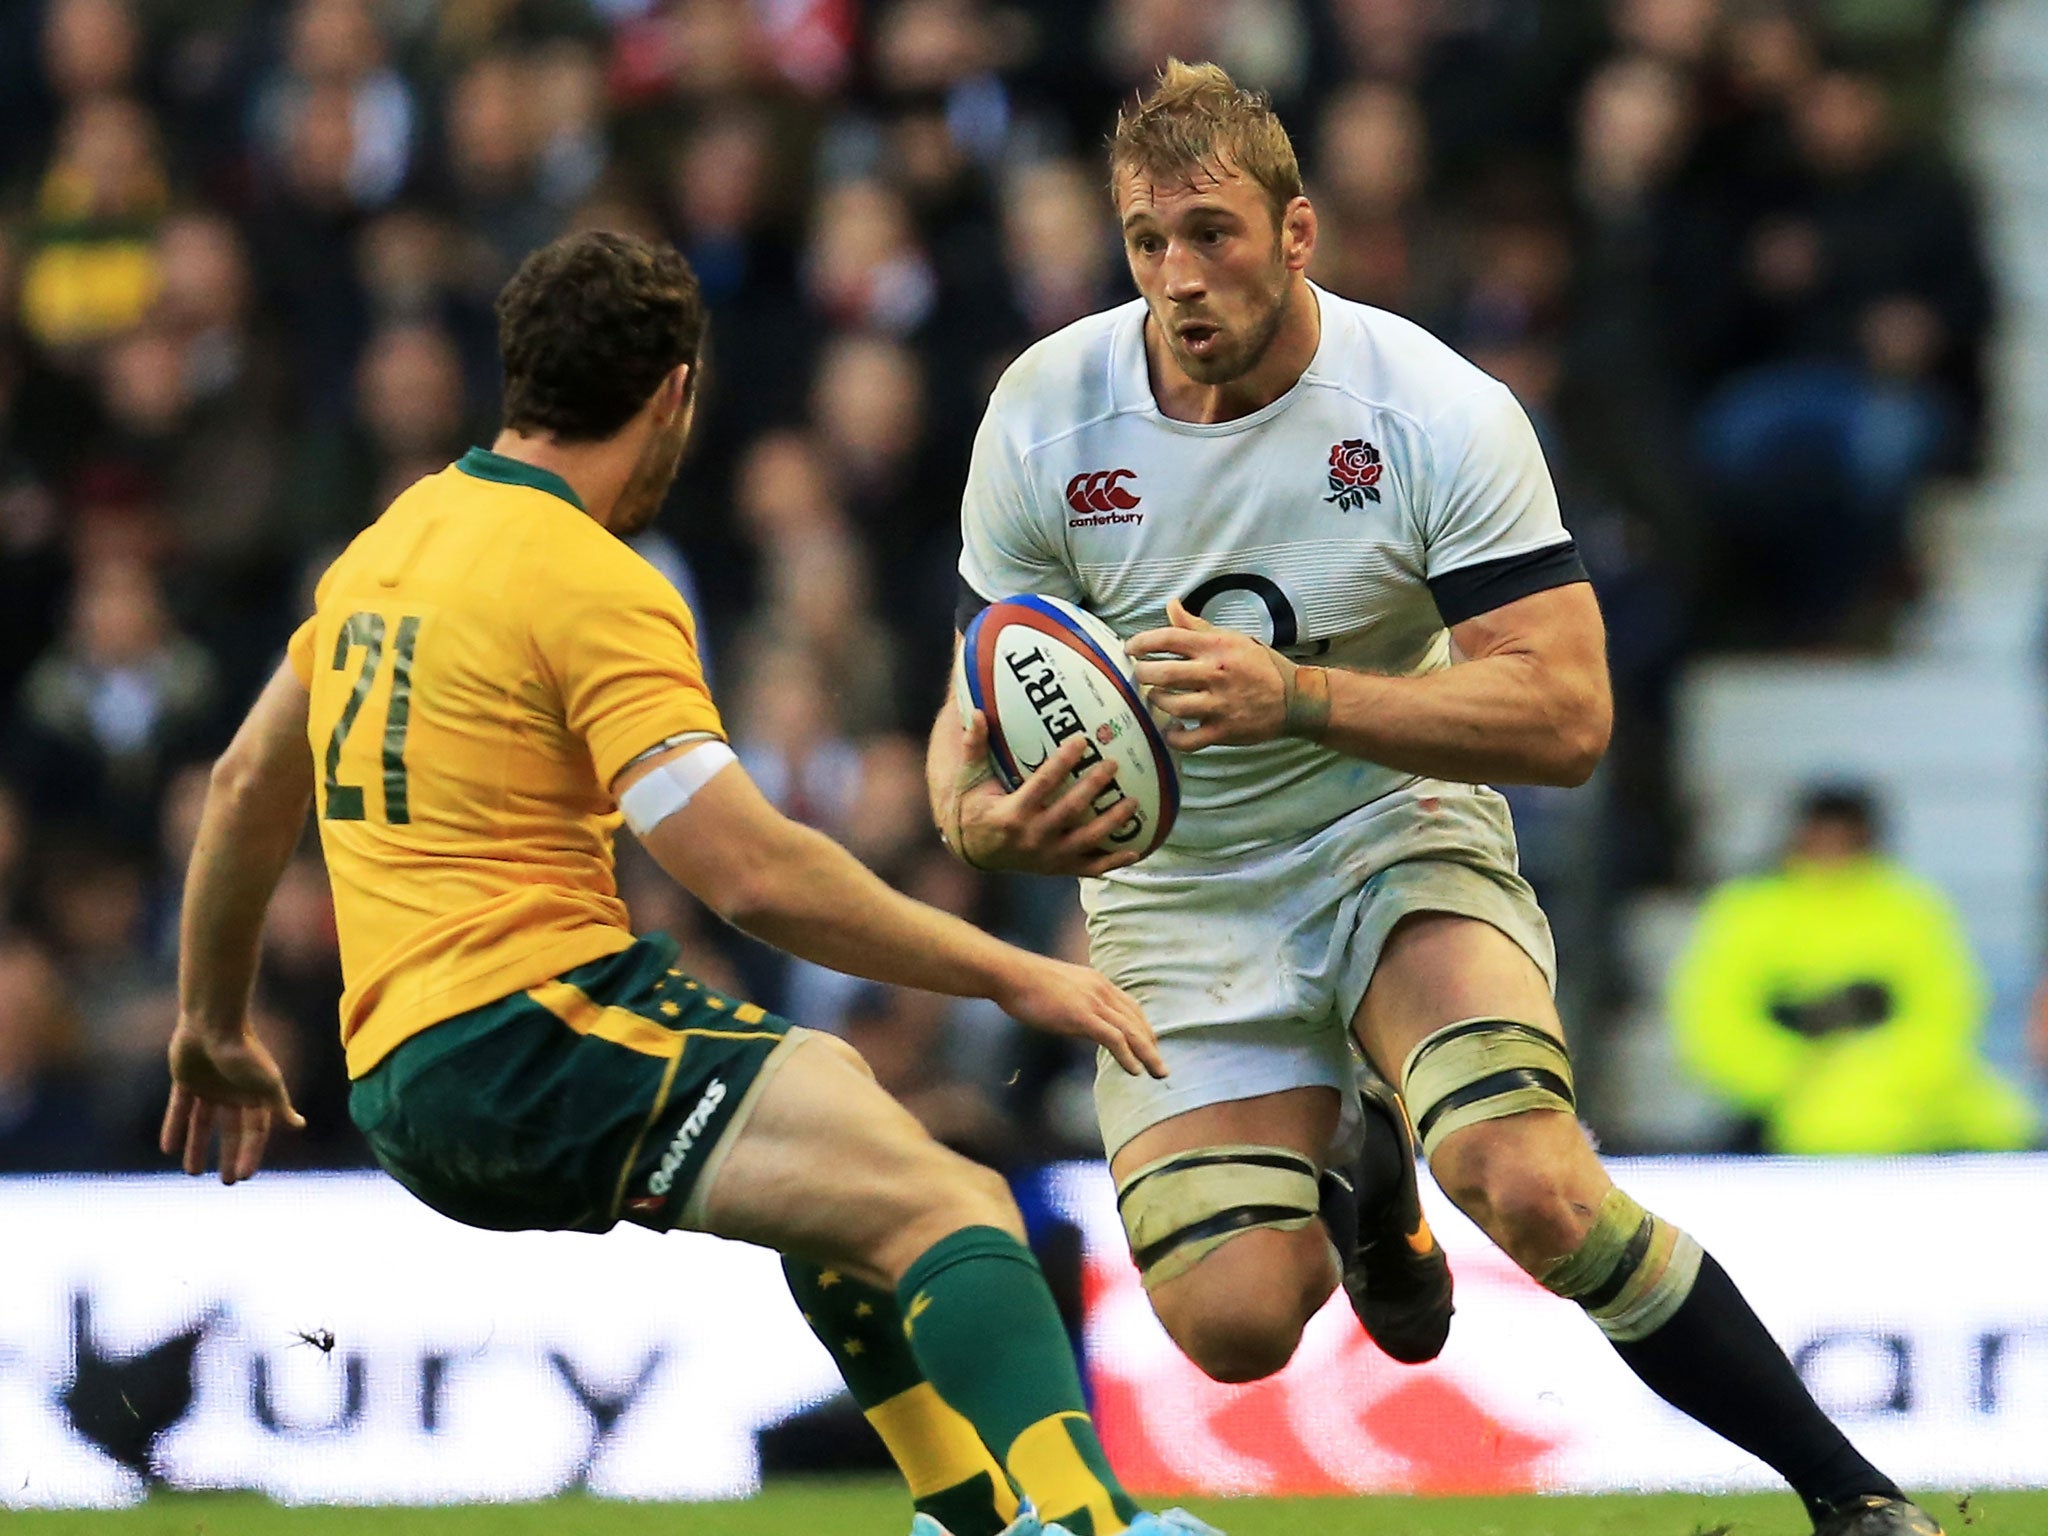 Chris Robshaw should have the best part of 40 caps in the bag come the next World Cup